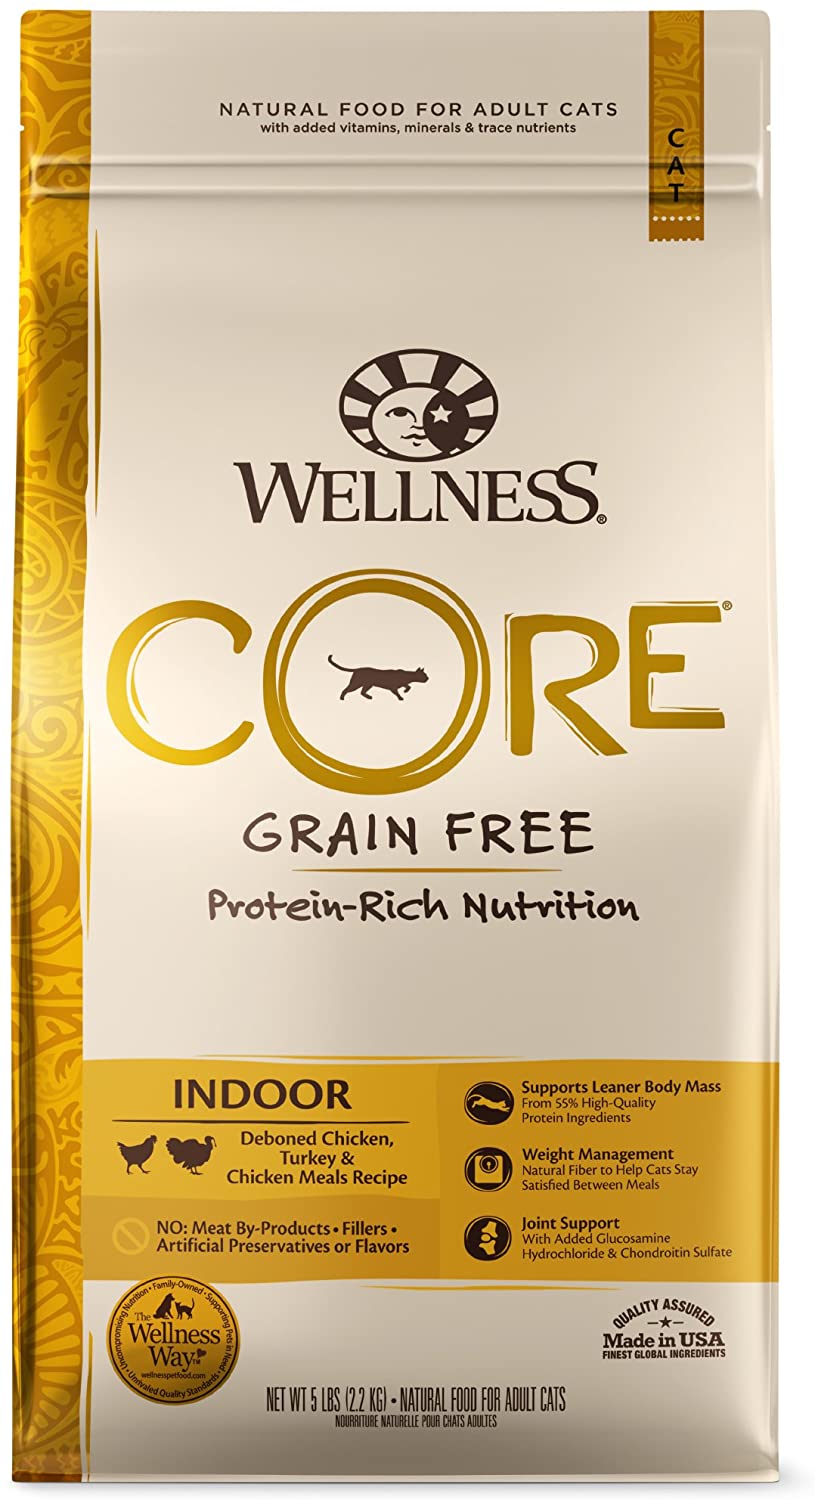 Wellness CORE Grain Free Natural Dry Food for Adult Cats